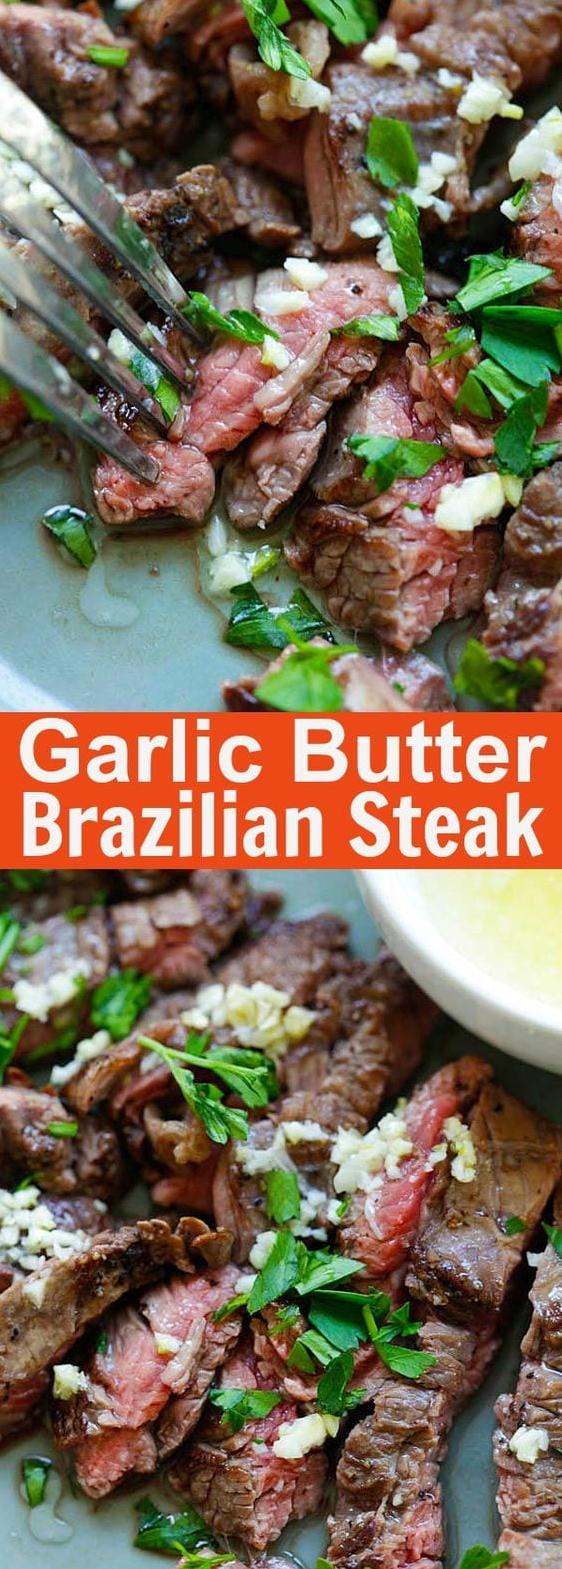  Elevate your steak game with this Brazilian-inspired recipe.